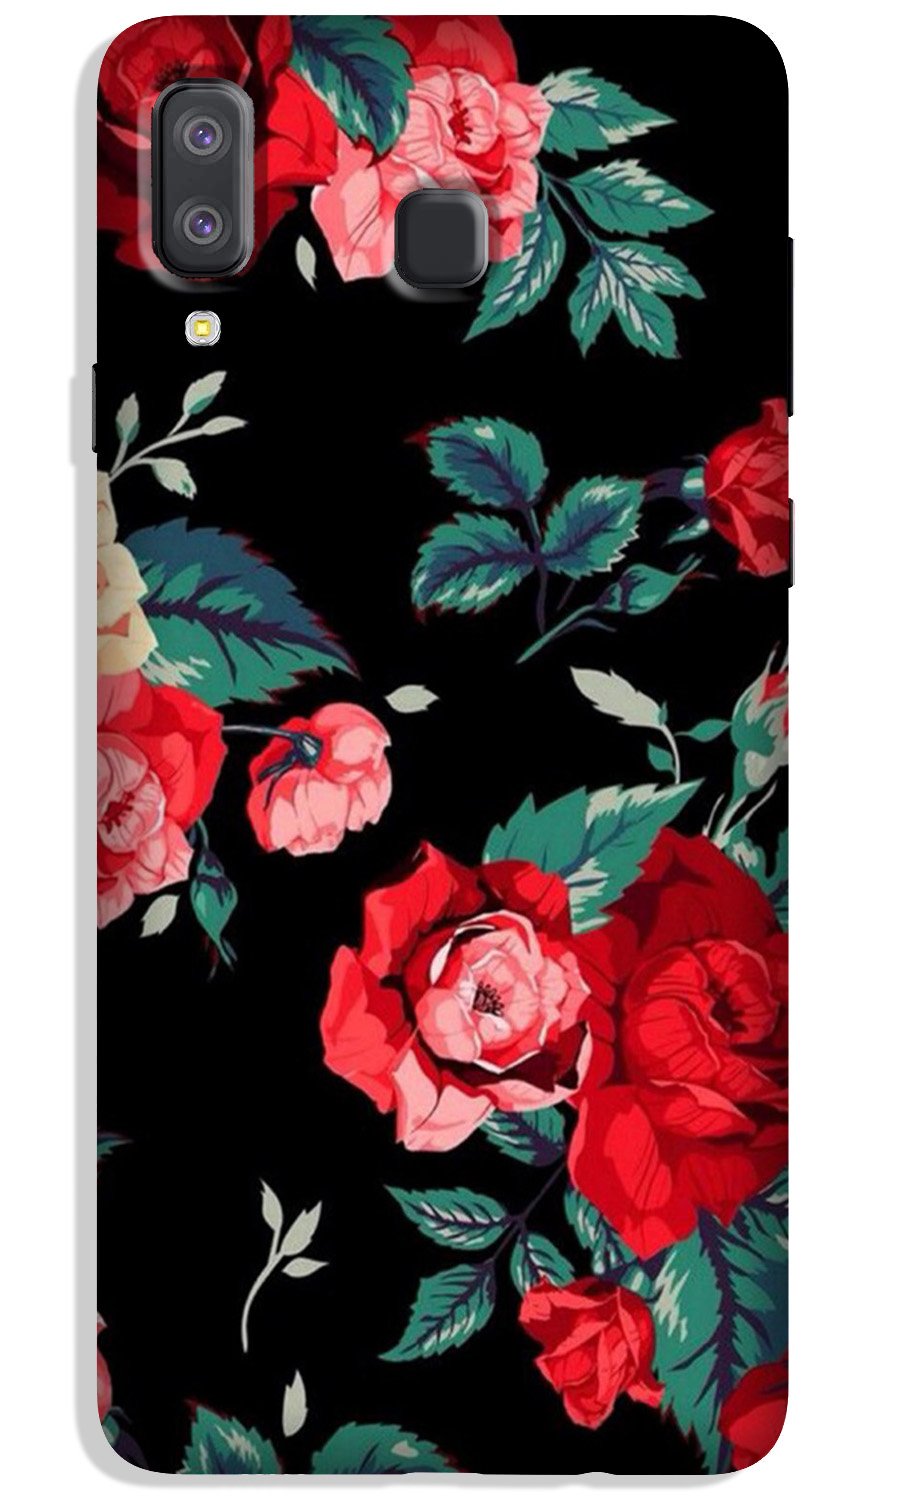 Red Rose2 Case for Galaxy A8 Star